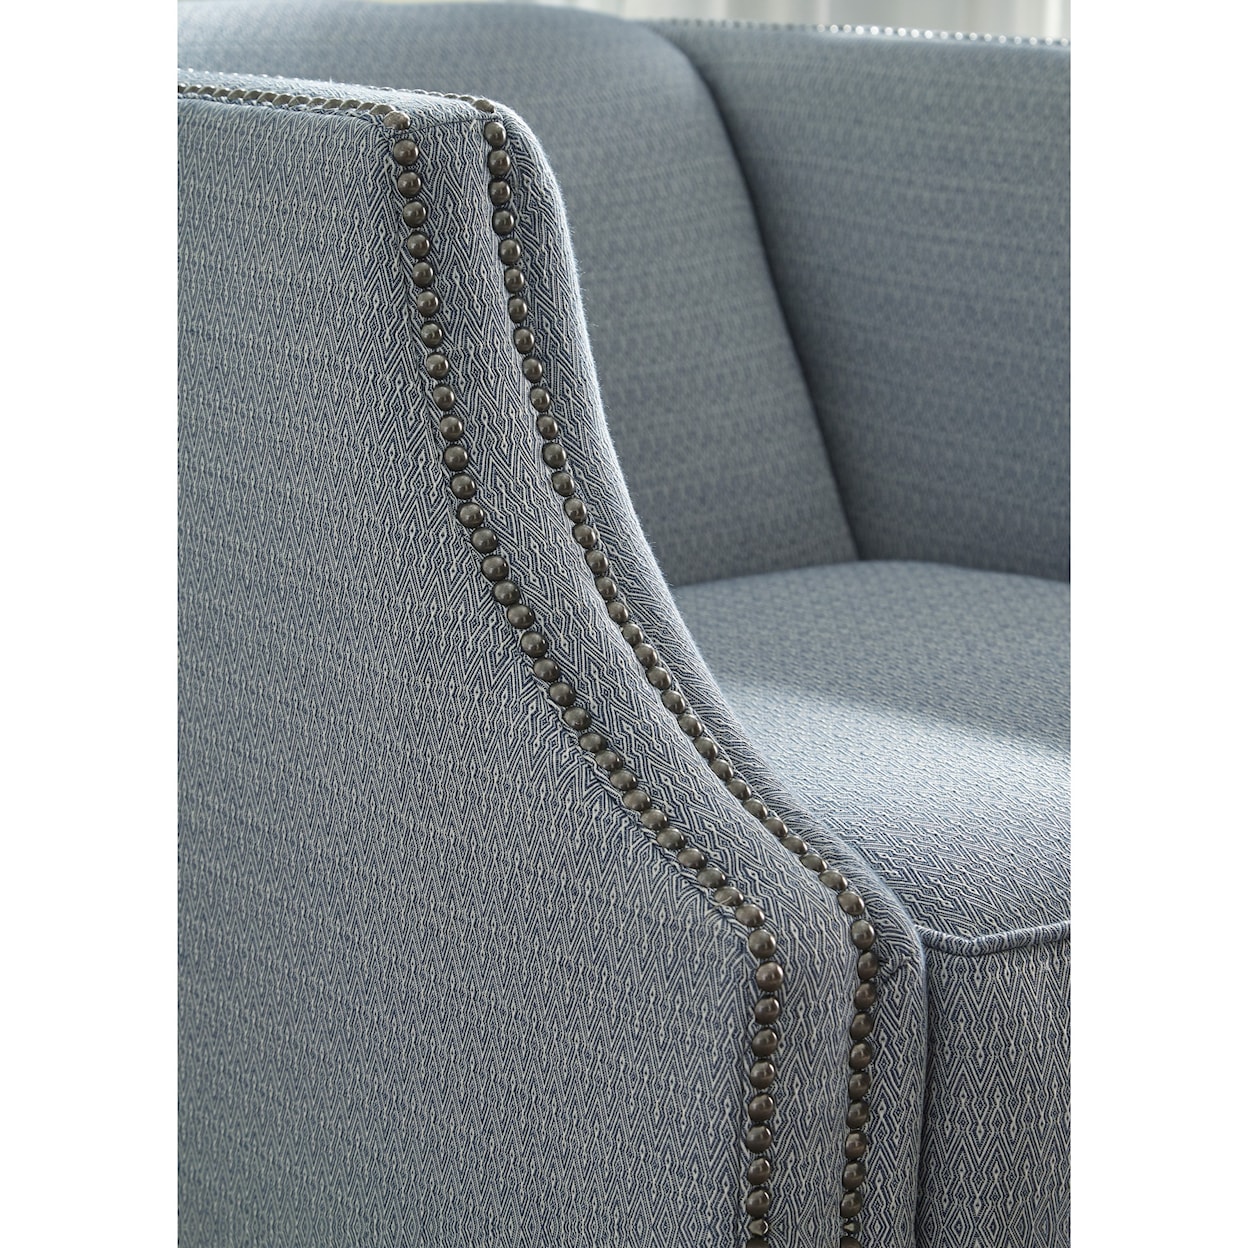 Benchcraft LaVernia Accent Chair